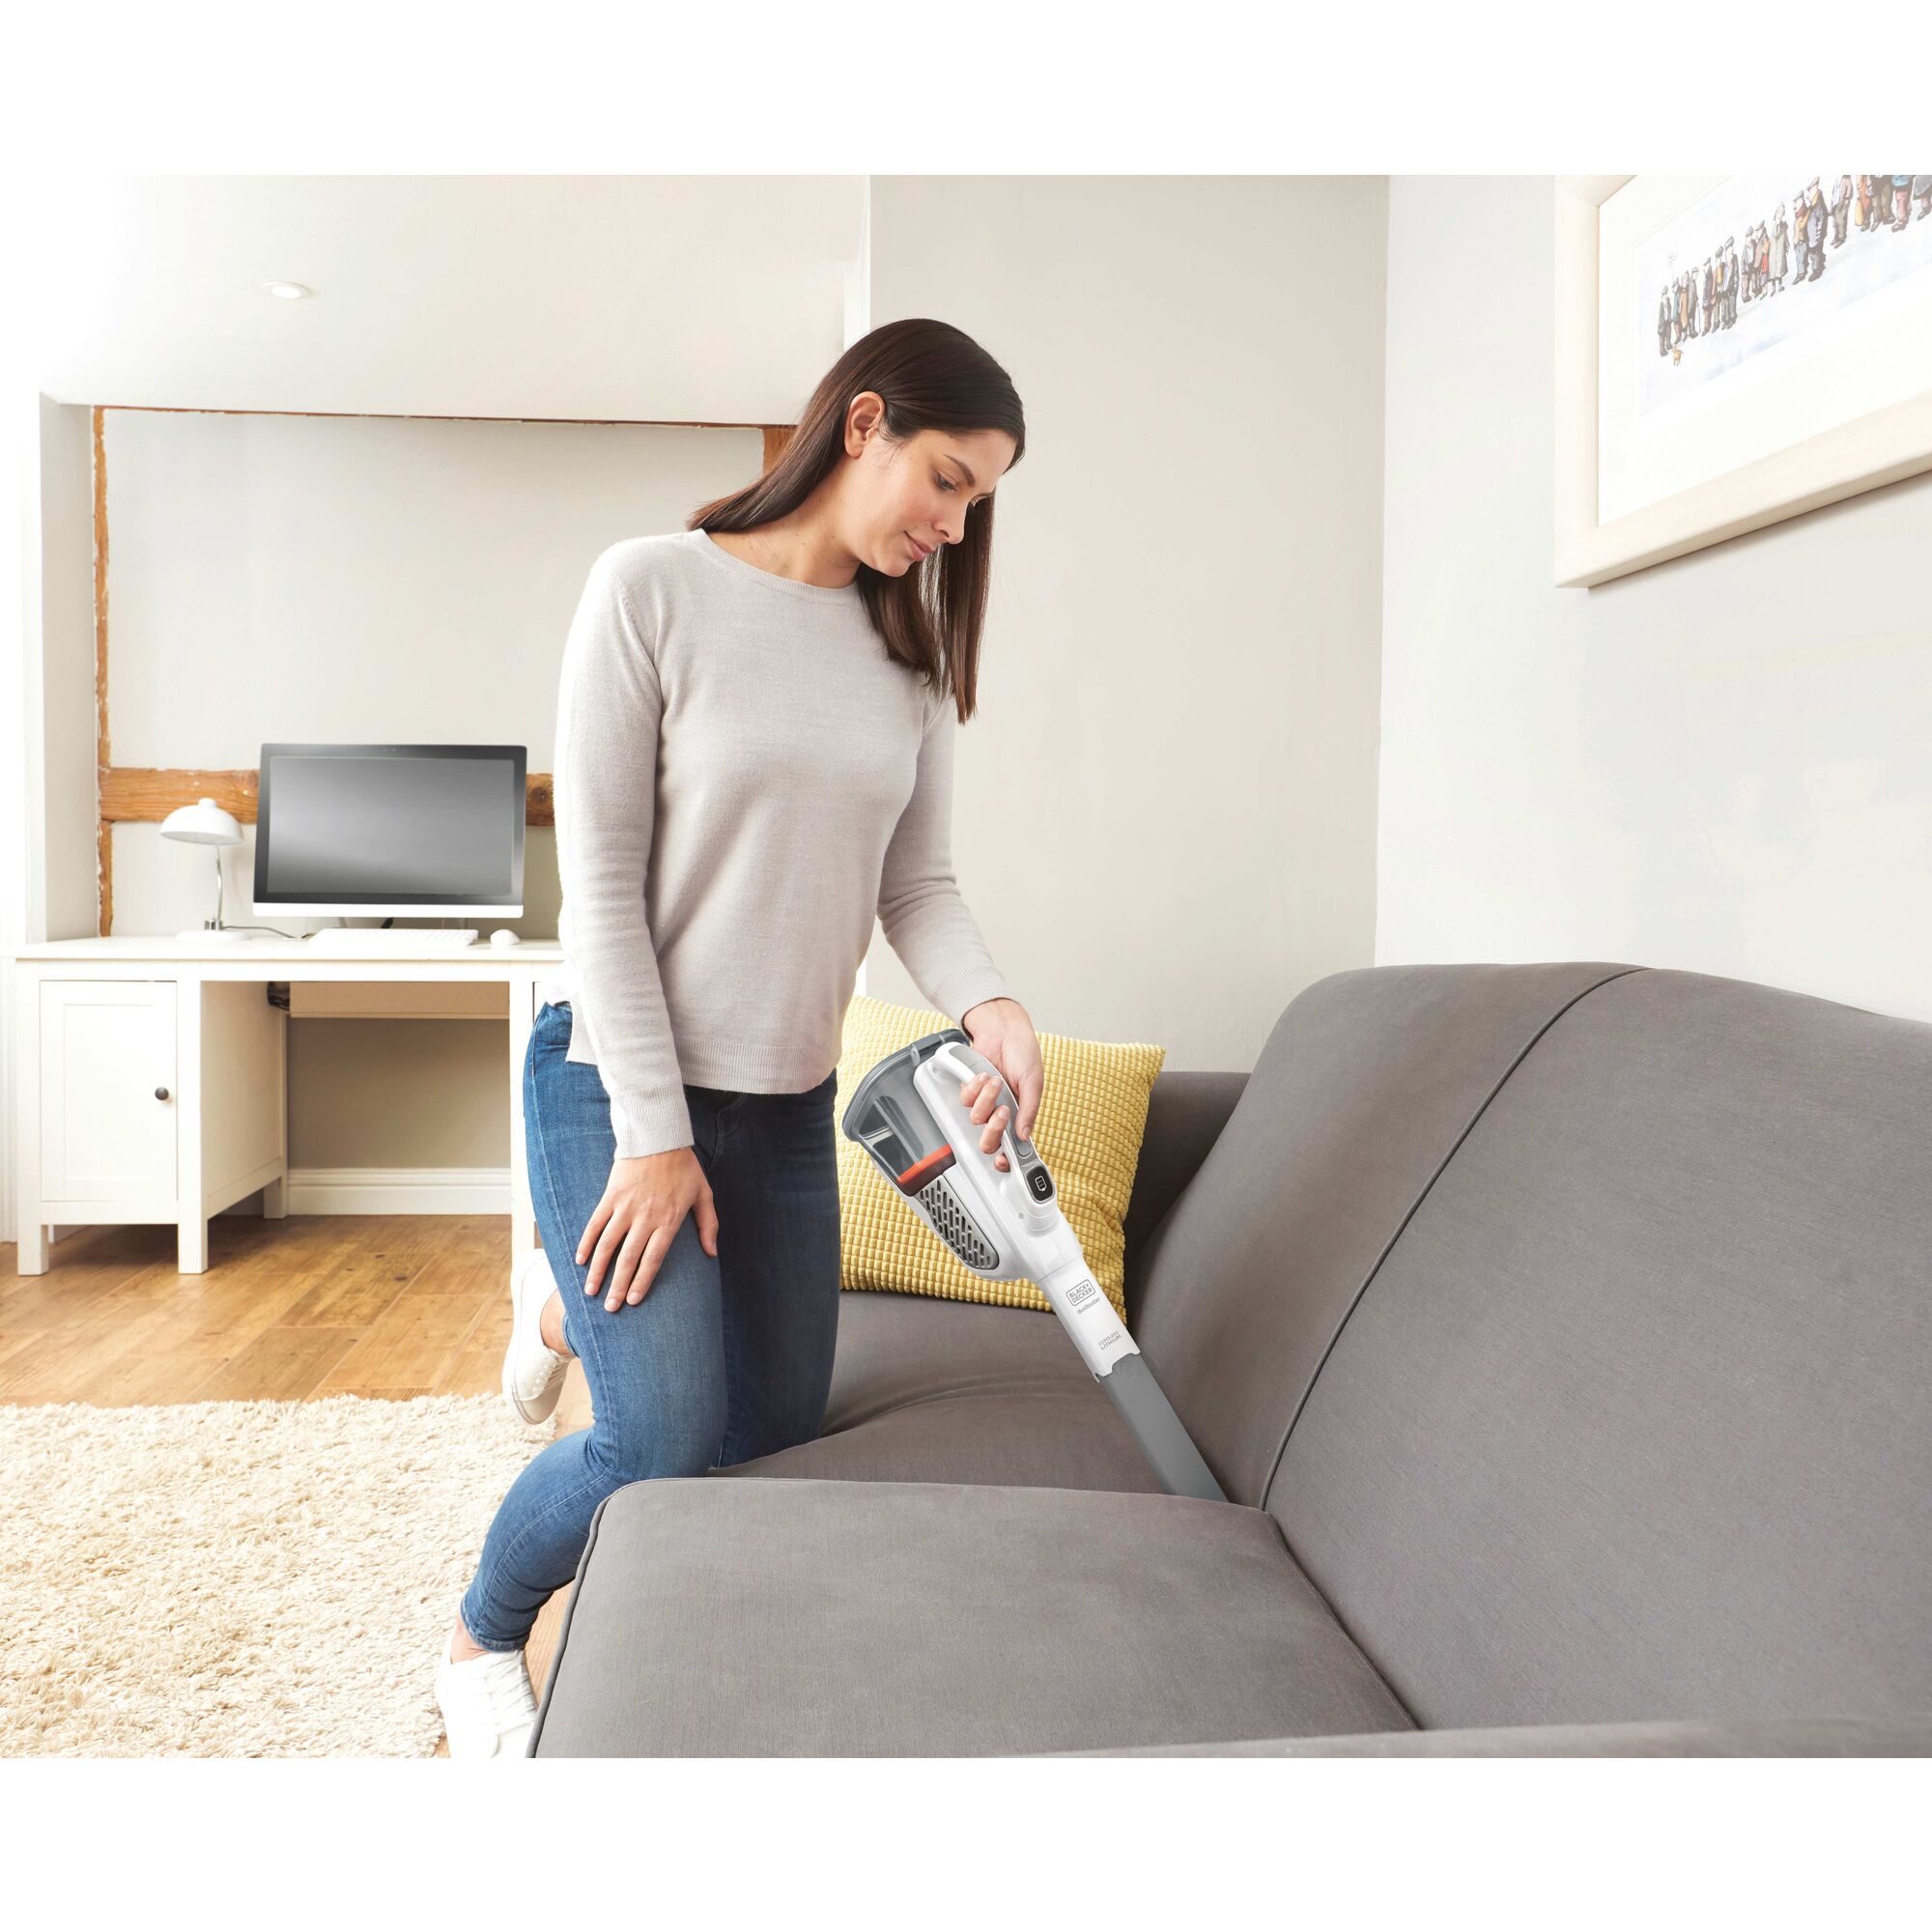 Dustbuster Advanced Clean plus  Cordless Hand Vacuum being used to clean hard to reach places of sofa.